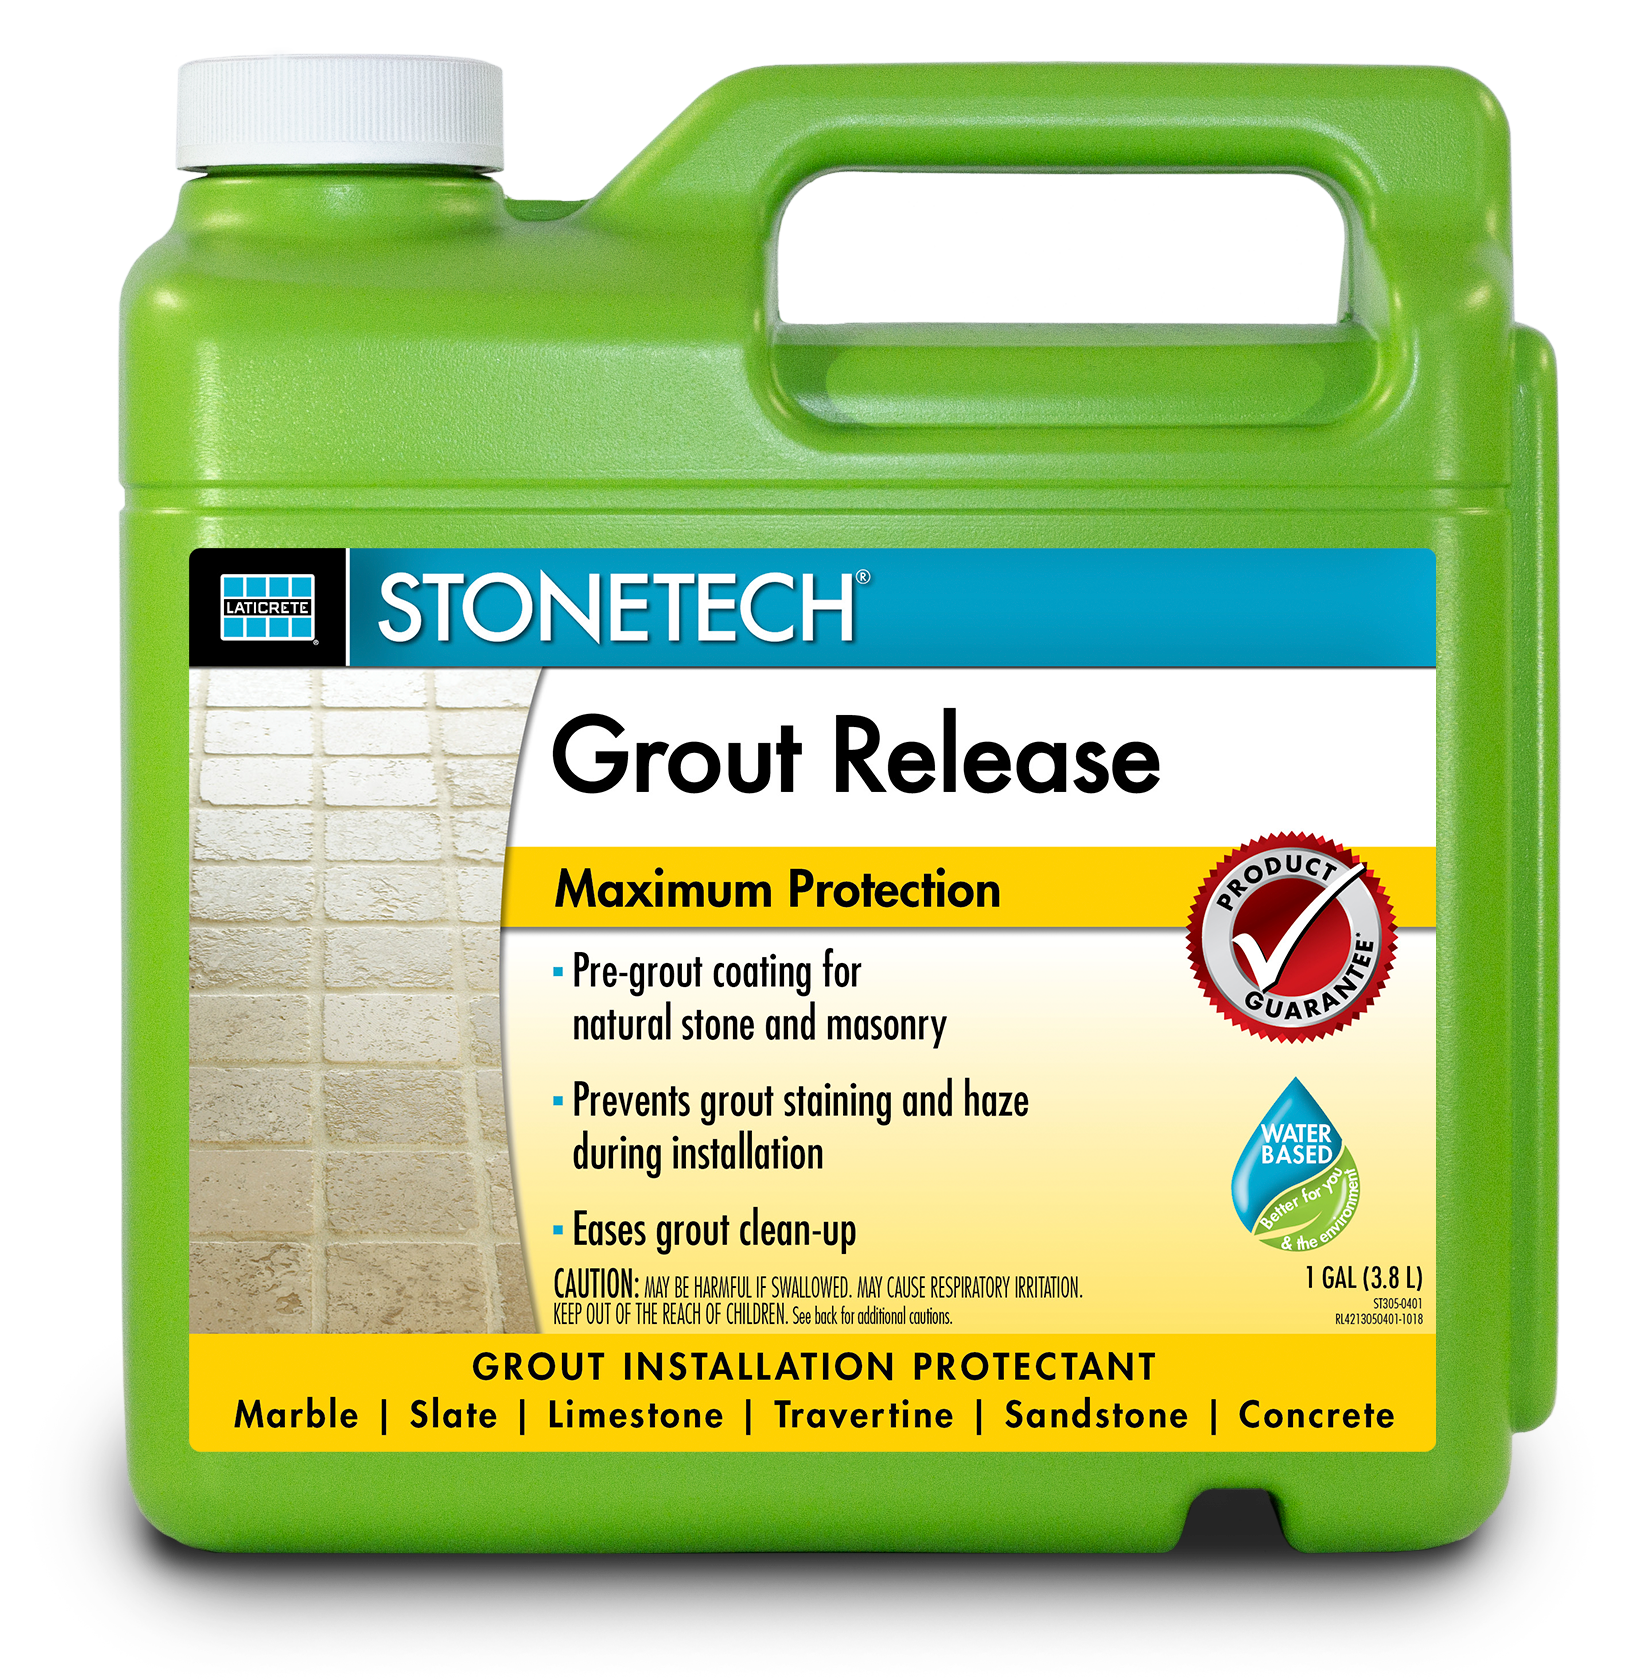 STONETECH® Grout Release